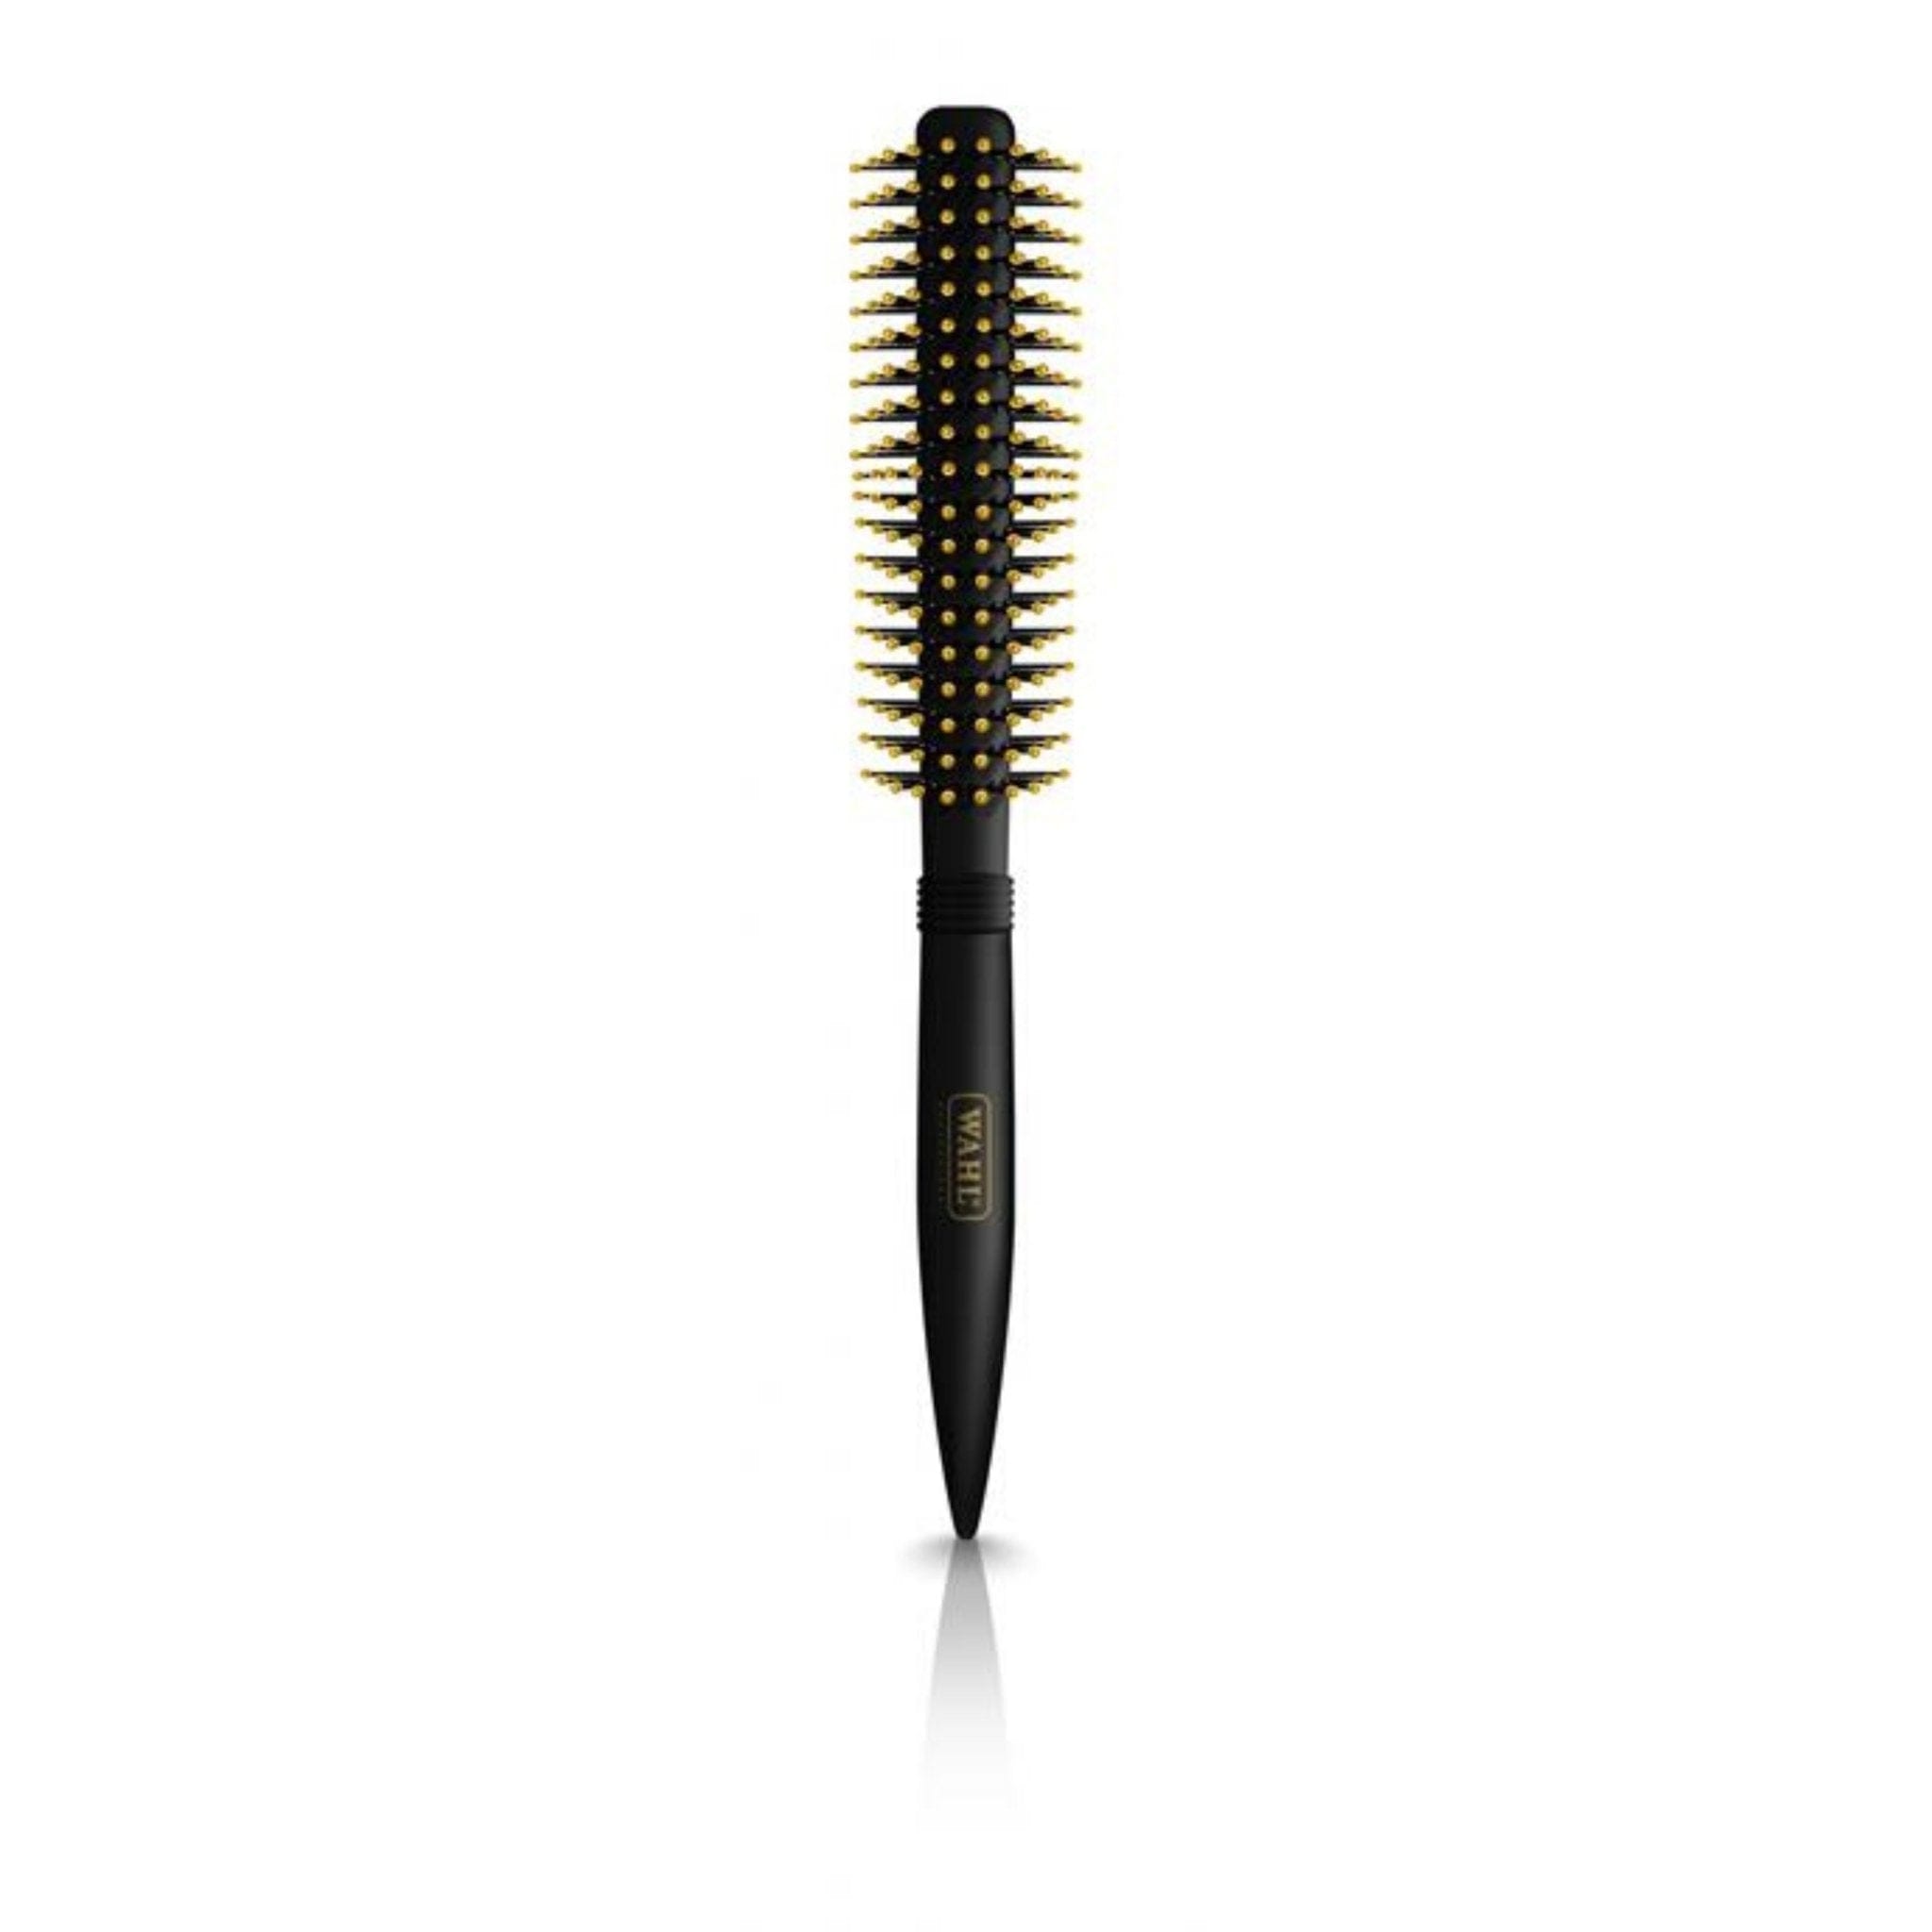 Wahl Barber Round Brush - HairBeautyInk